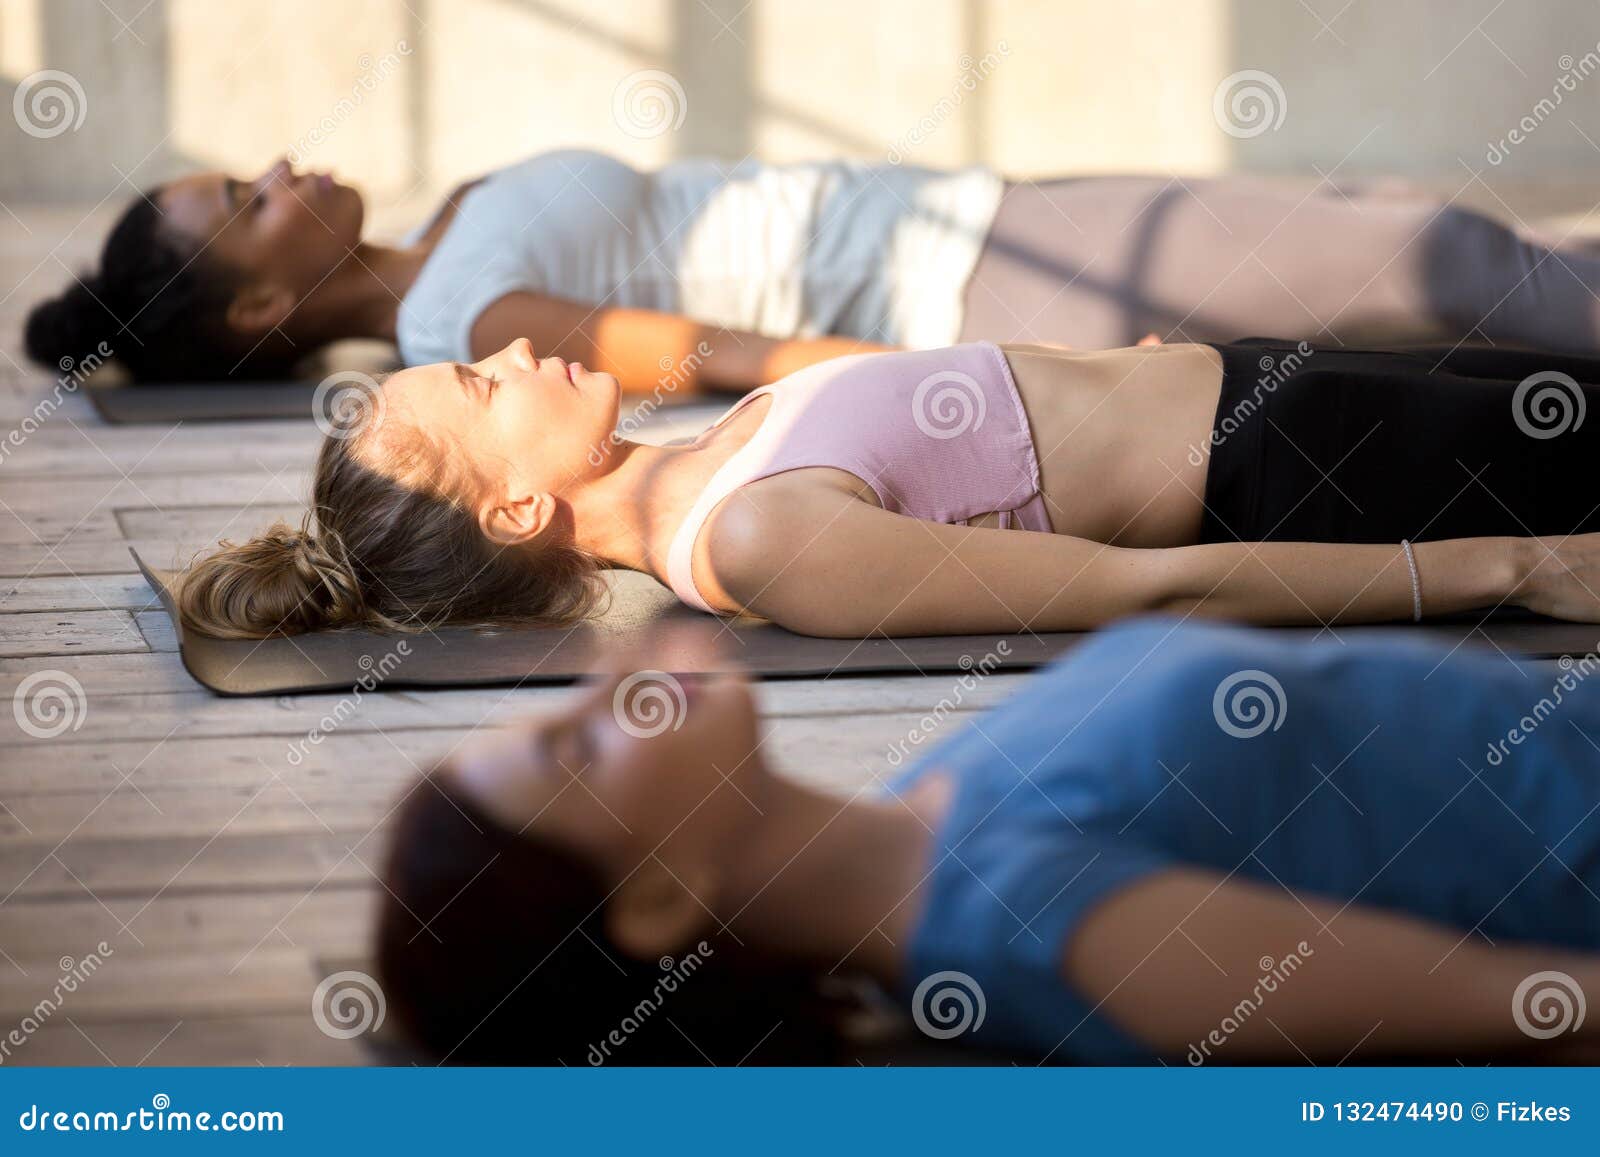 group of attractive women practicing yoga in dead body pose